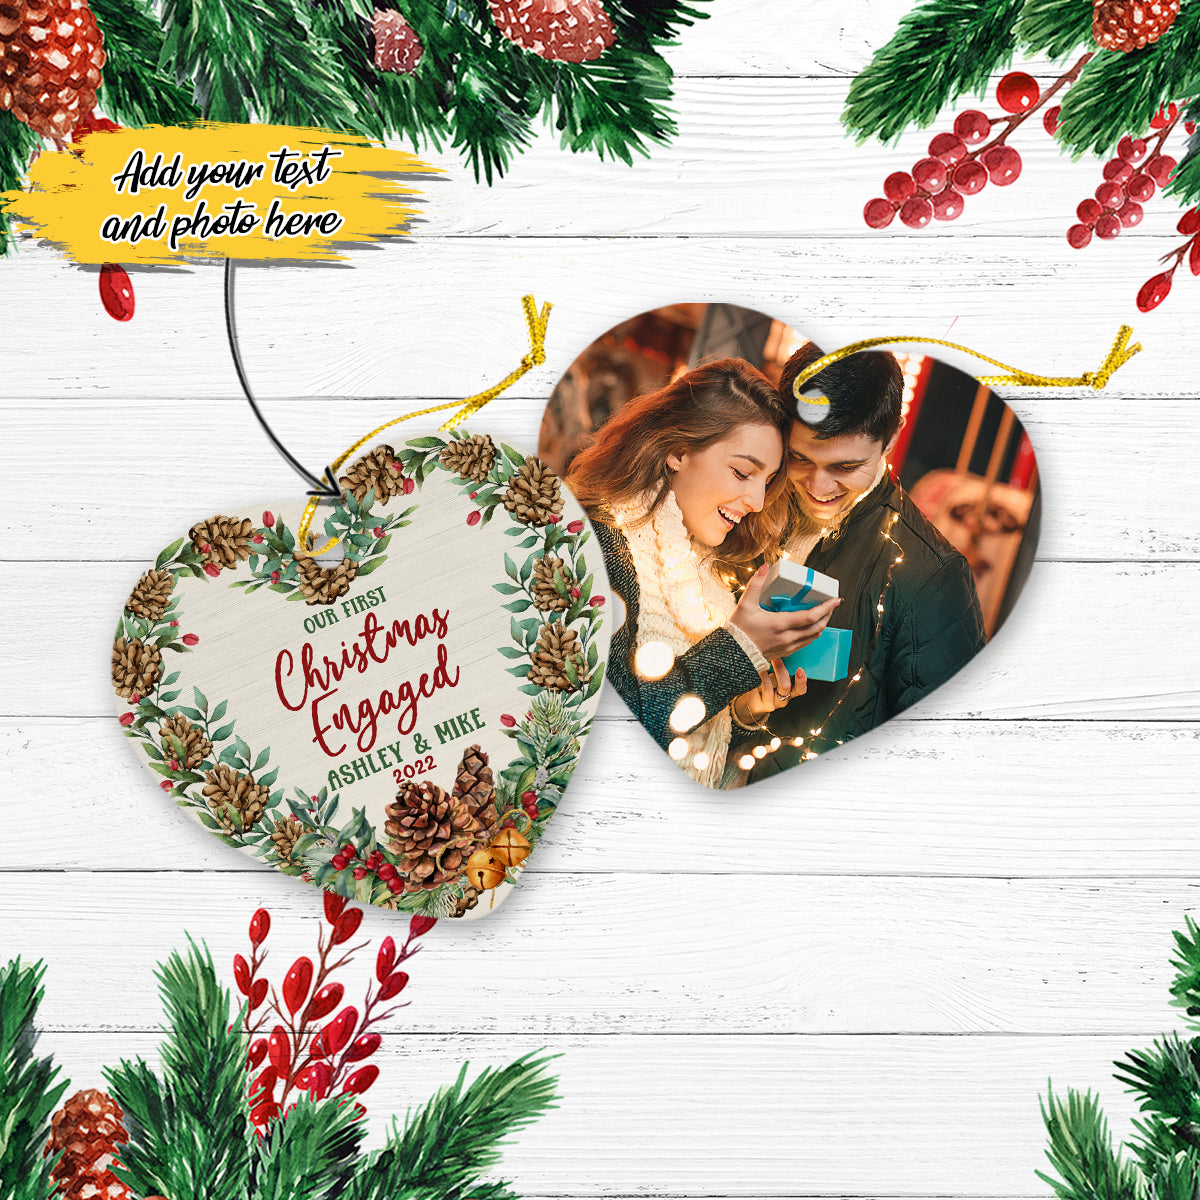 Our First Christmas Engaged with Photo Personalized Christmas Premium Ceramic Ornaments Sets for Christmas Tree